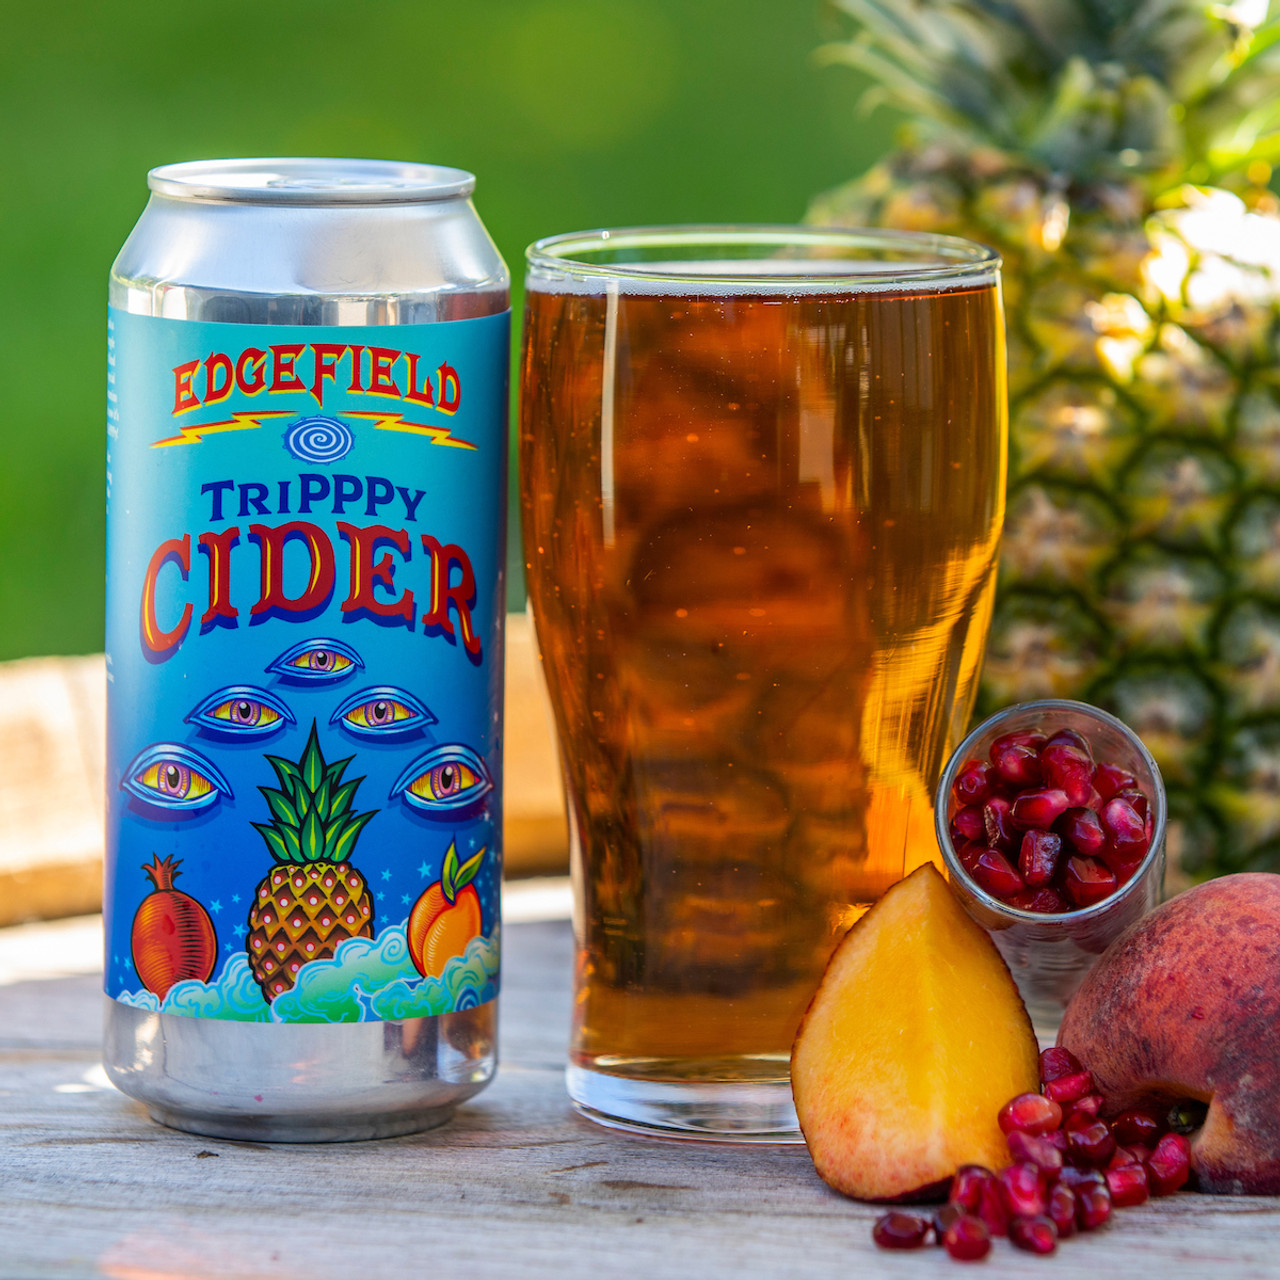 Can of Edgefield Tripppy Cider next to draft pour of it and a pineapple, pomegranate, and peach